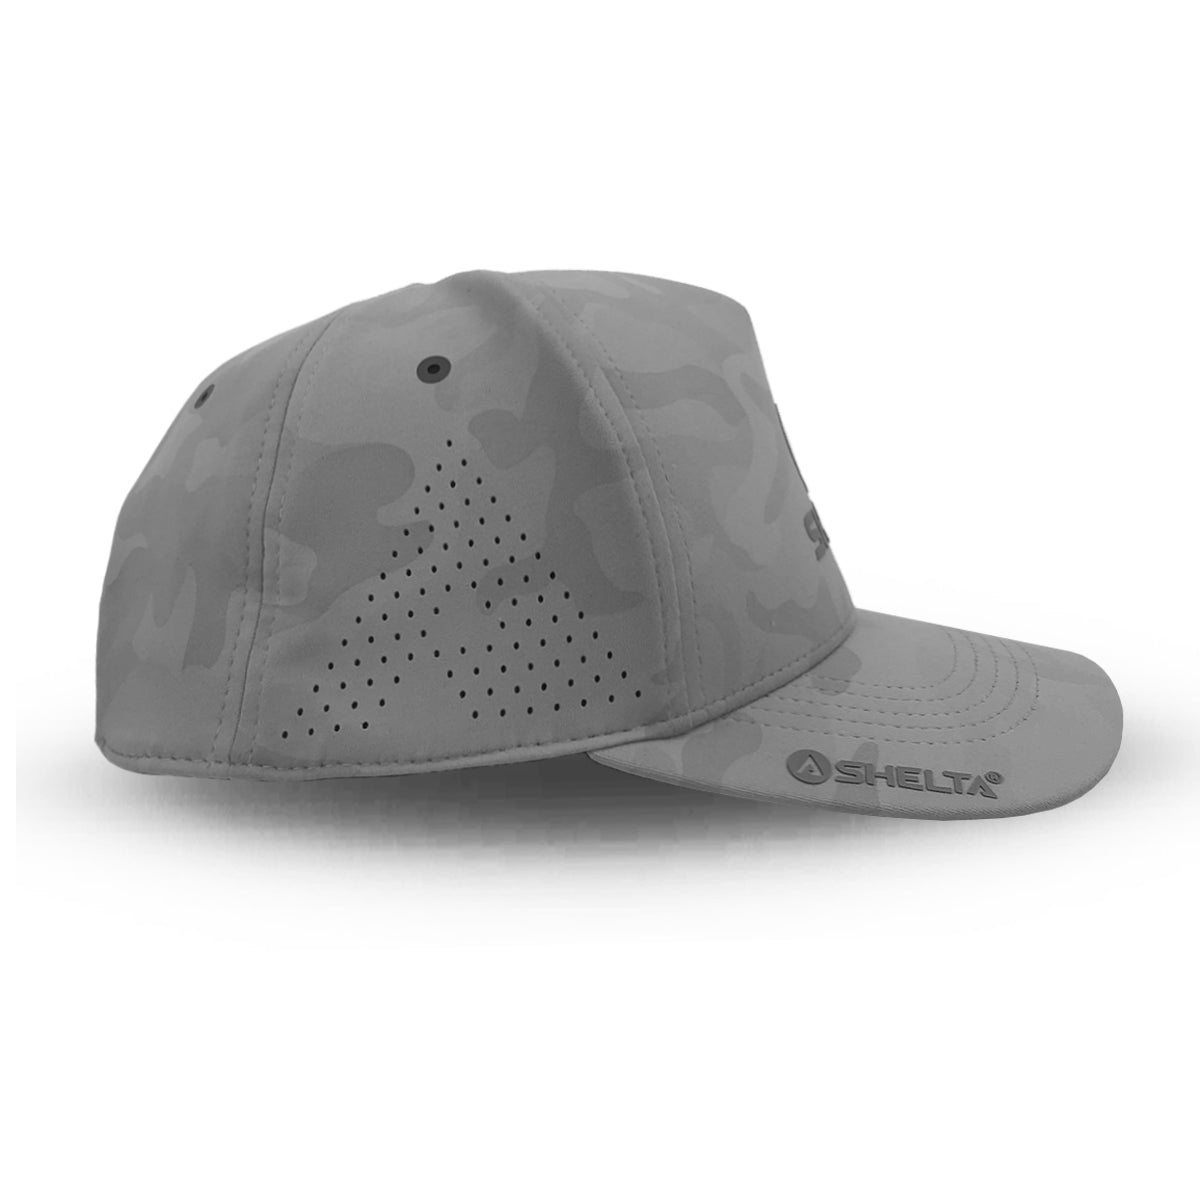 Side View of the grey camo hector cap